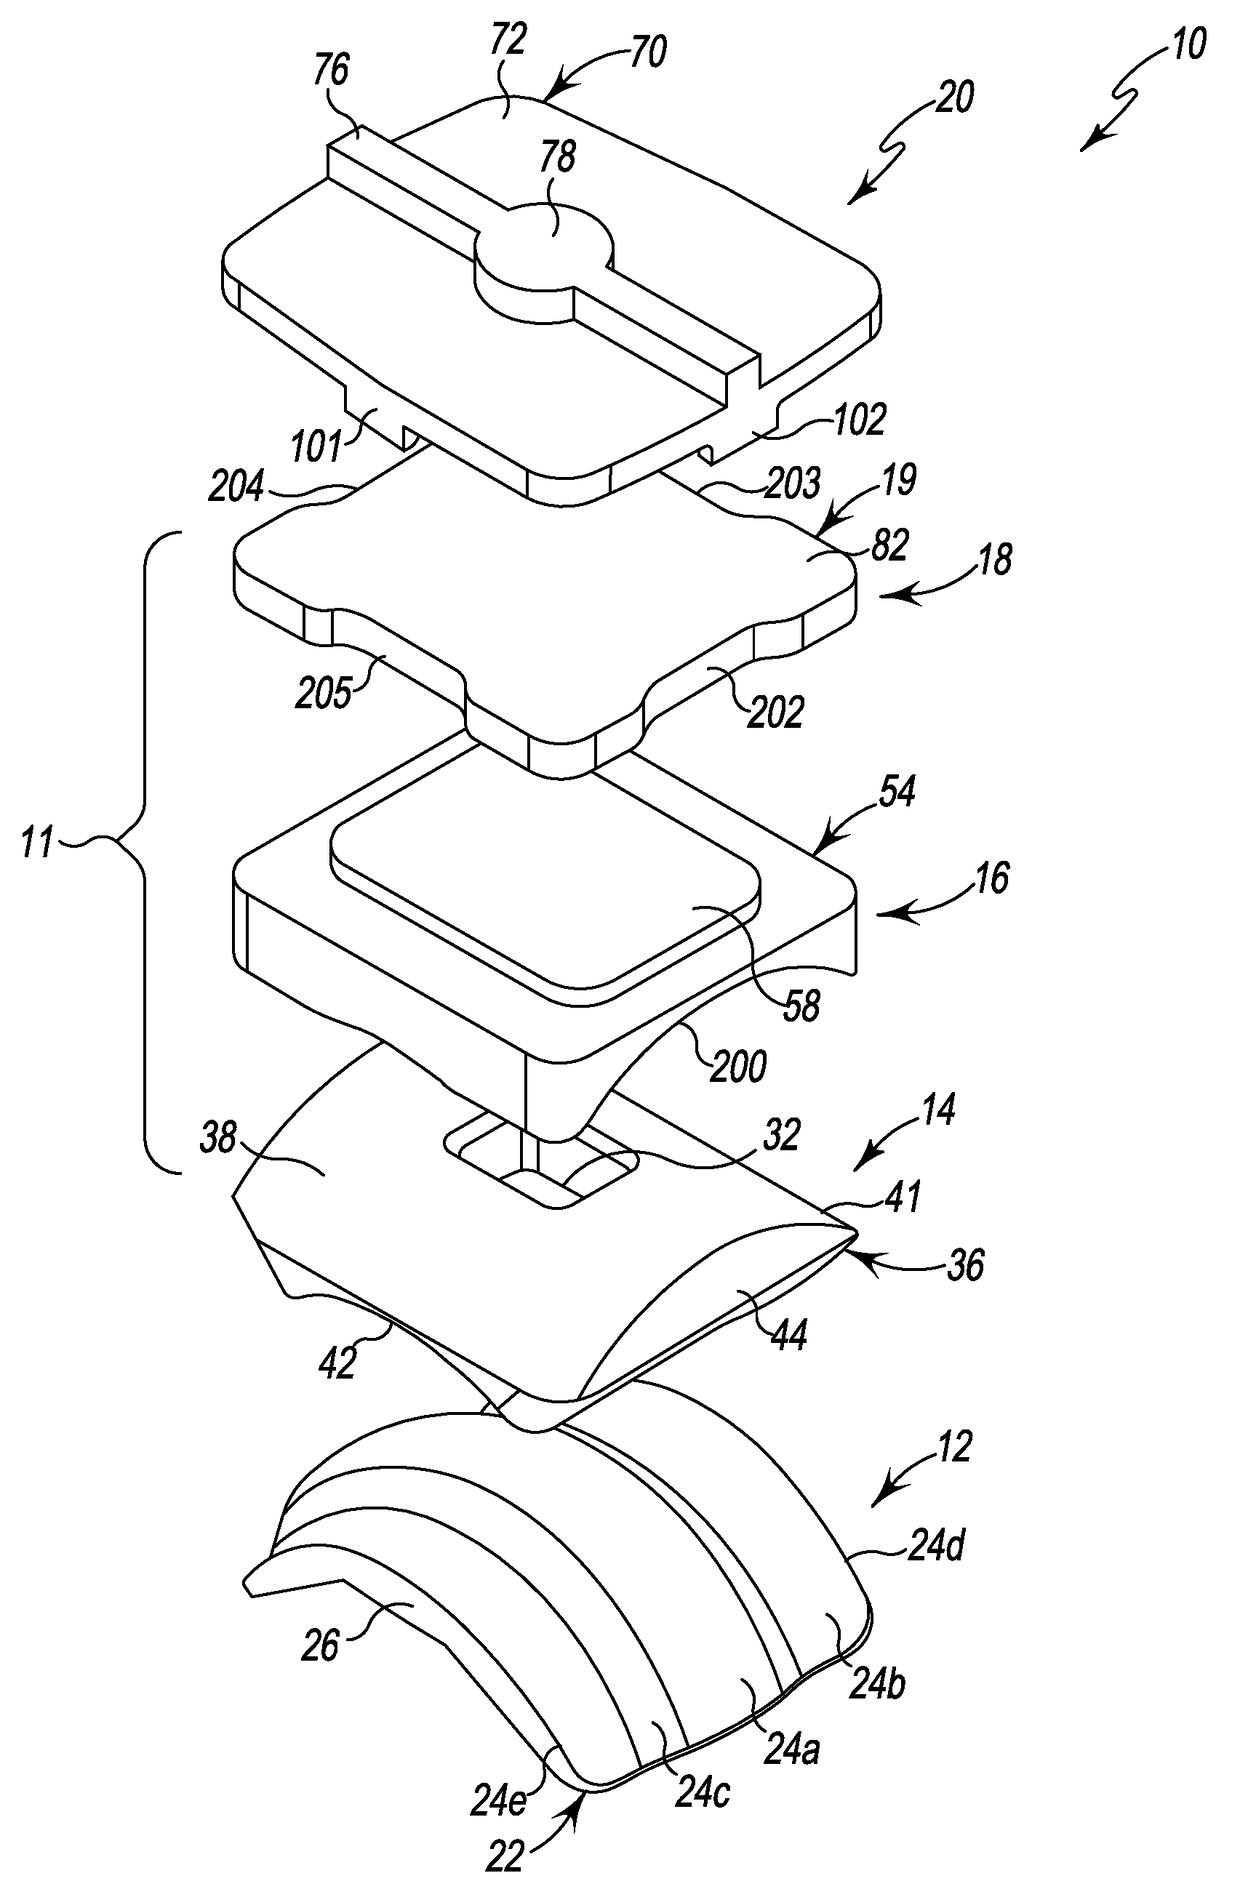 Ankle joint replacement implant with bearing interchangeability